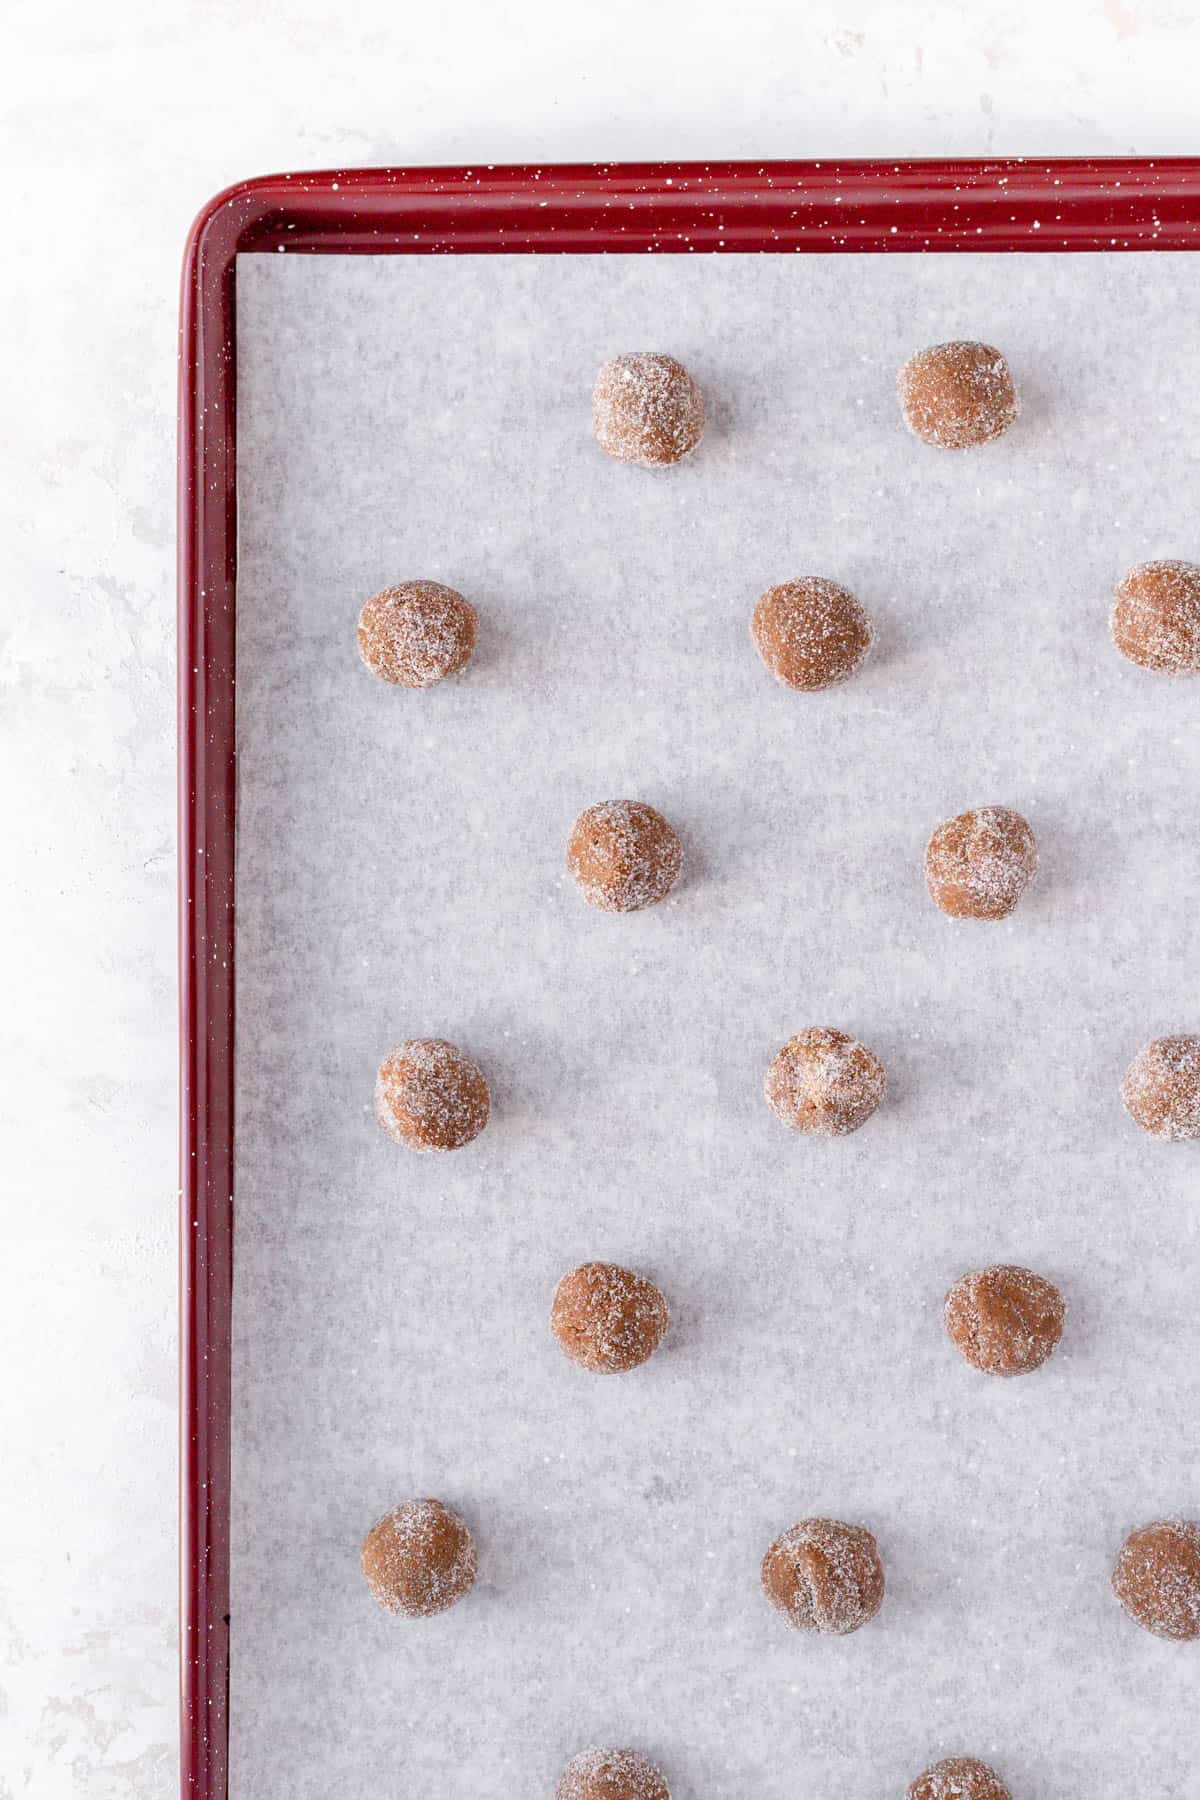 Ginger spice cookie dough balls coded in sugar and parchment paper on a red baking sheet